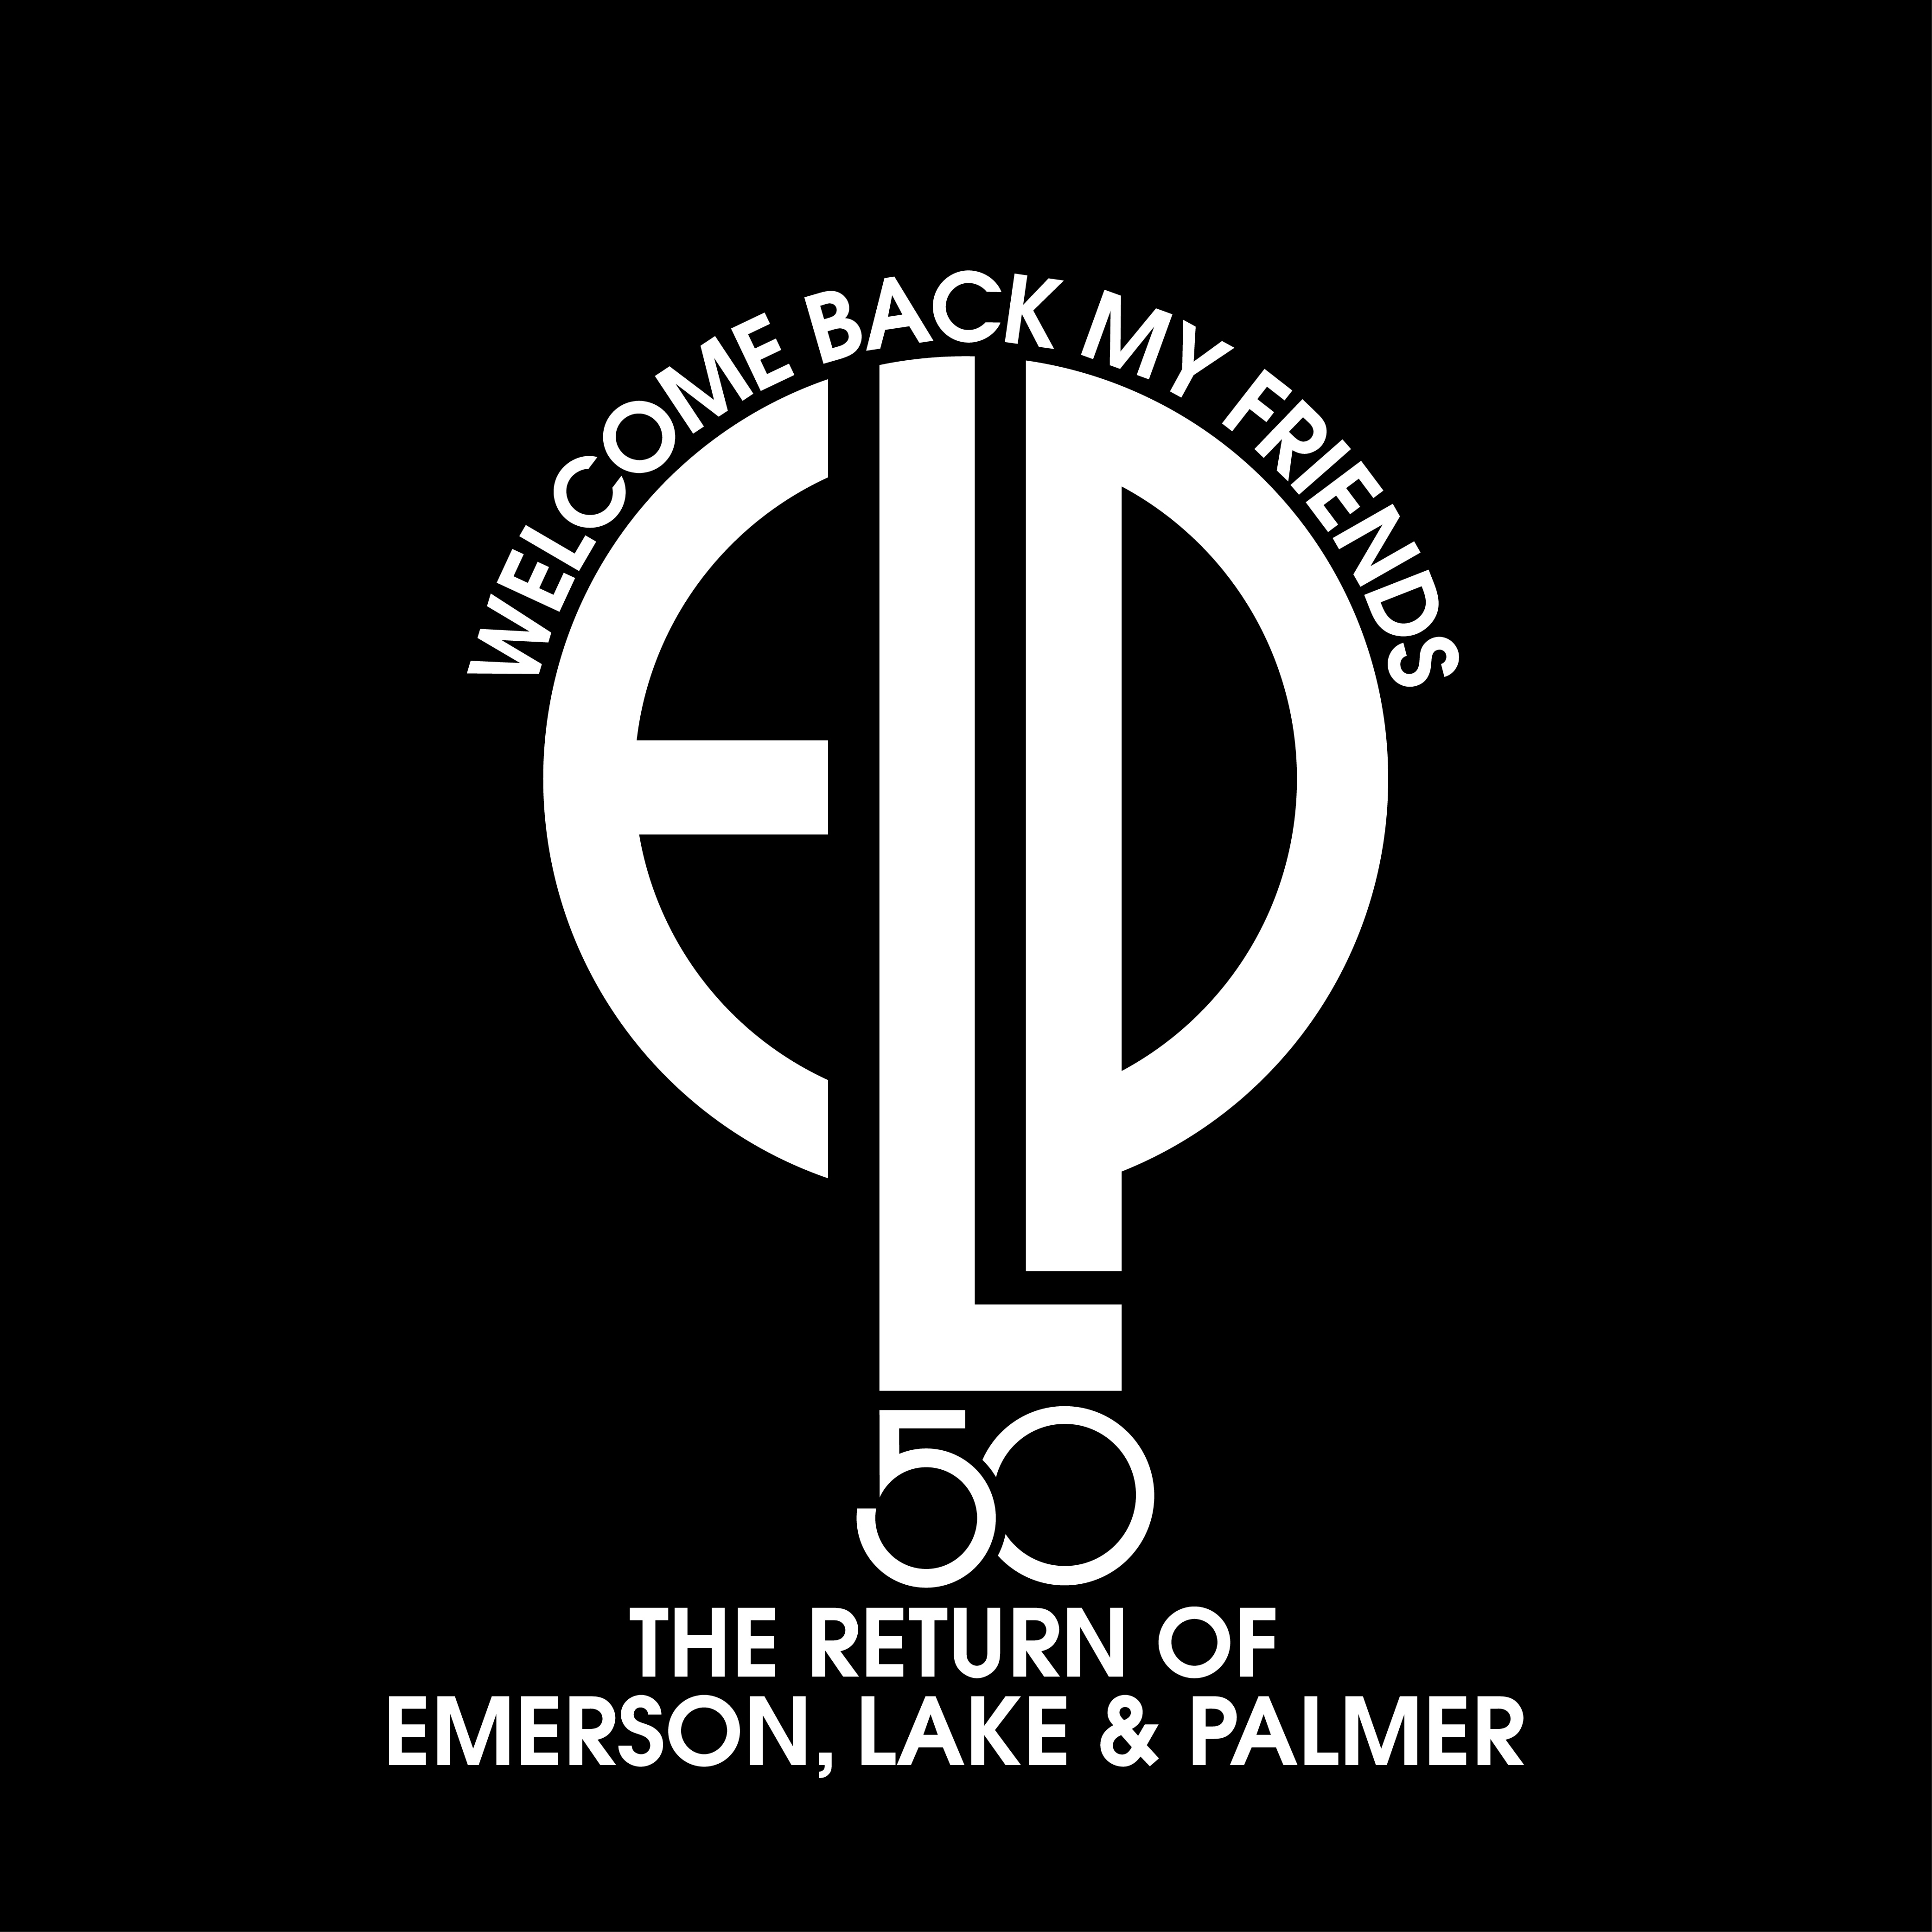 WELCOME BACK MY FRIENDS- THE RETURN OF EMERSON LAKE &  PALMER Tour